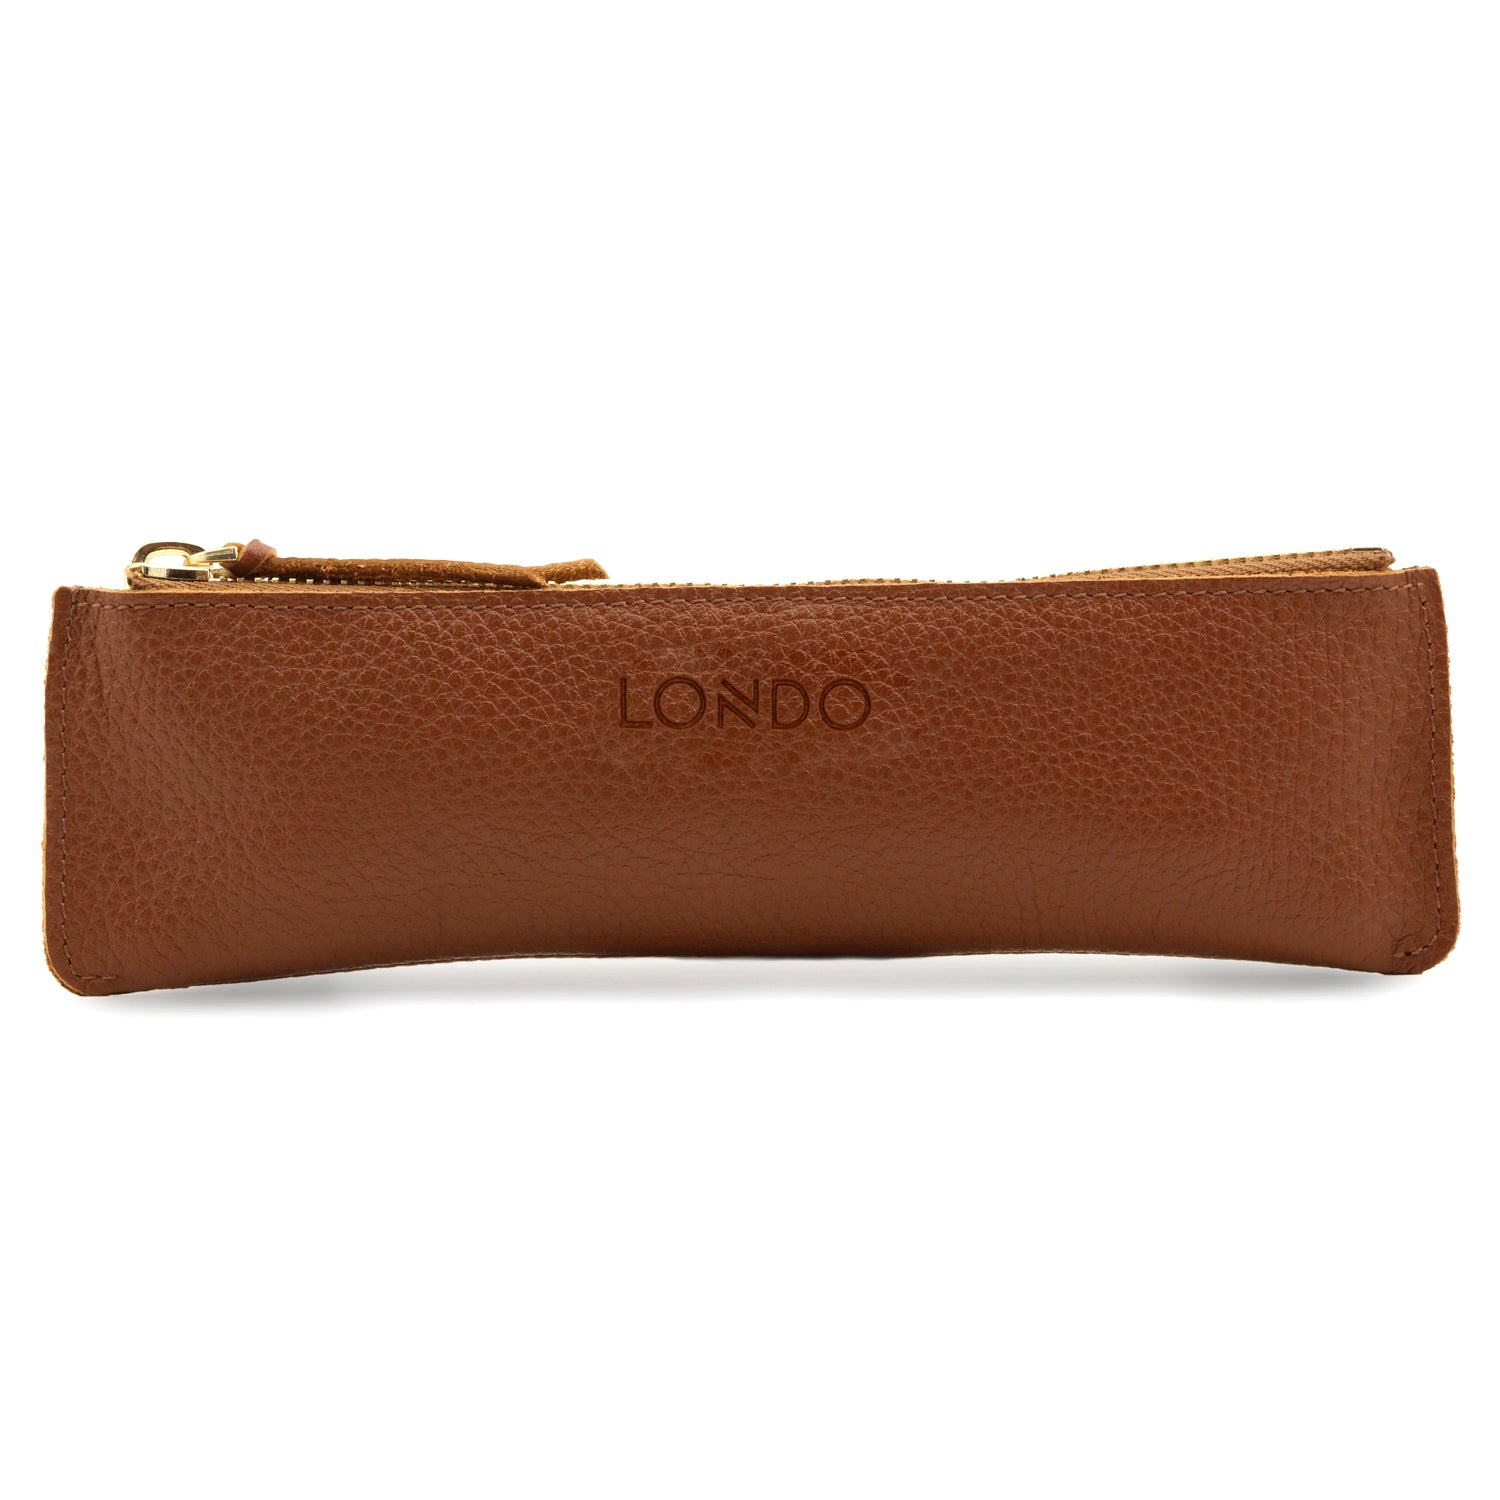 Londo Genuine Leather Padfolio with Pencil Holder Notepad and Zipper Closure (cinnamon)